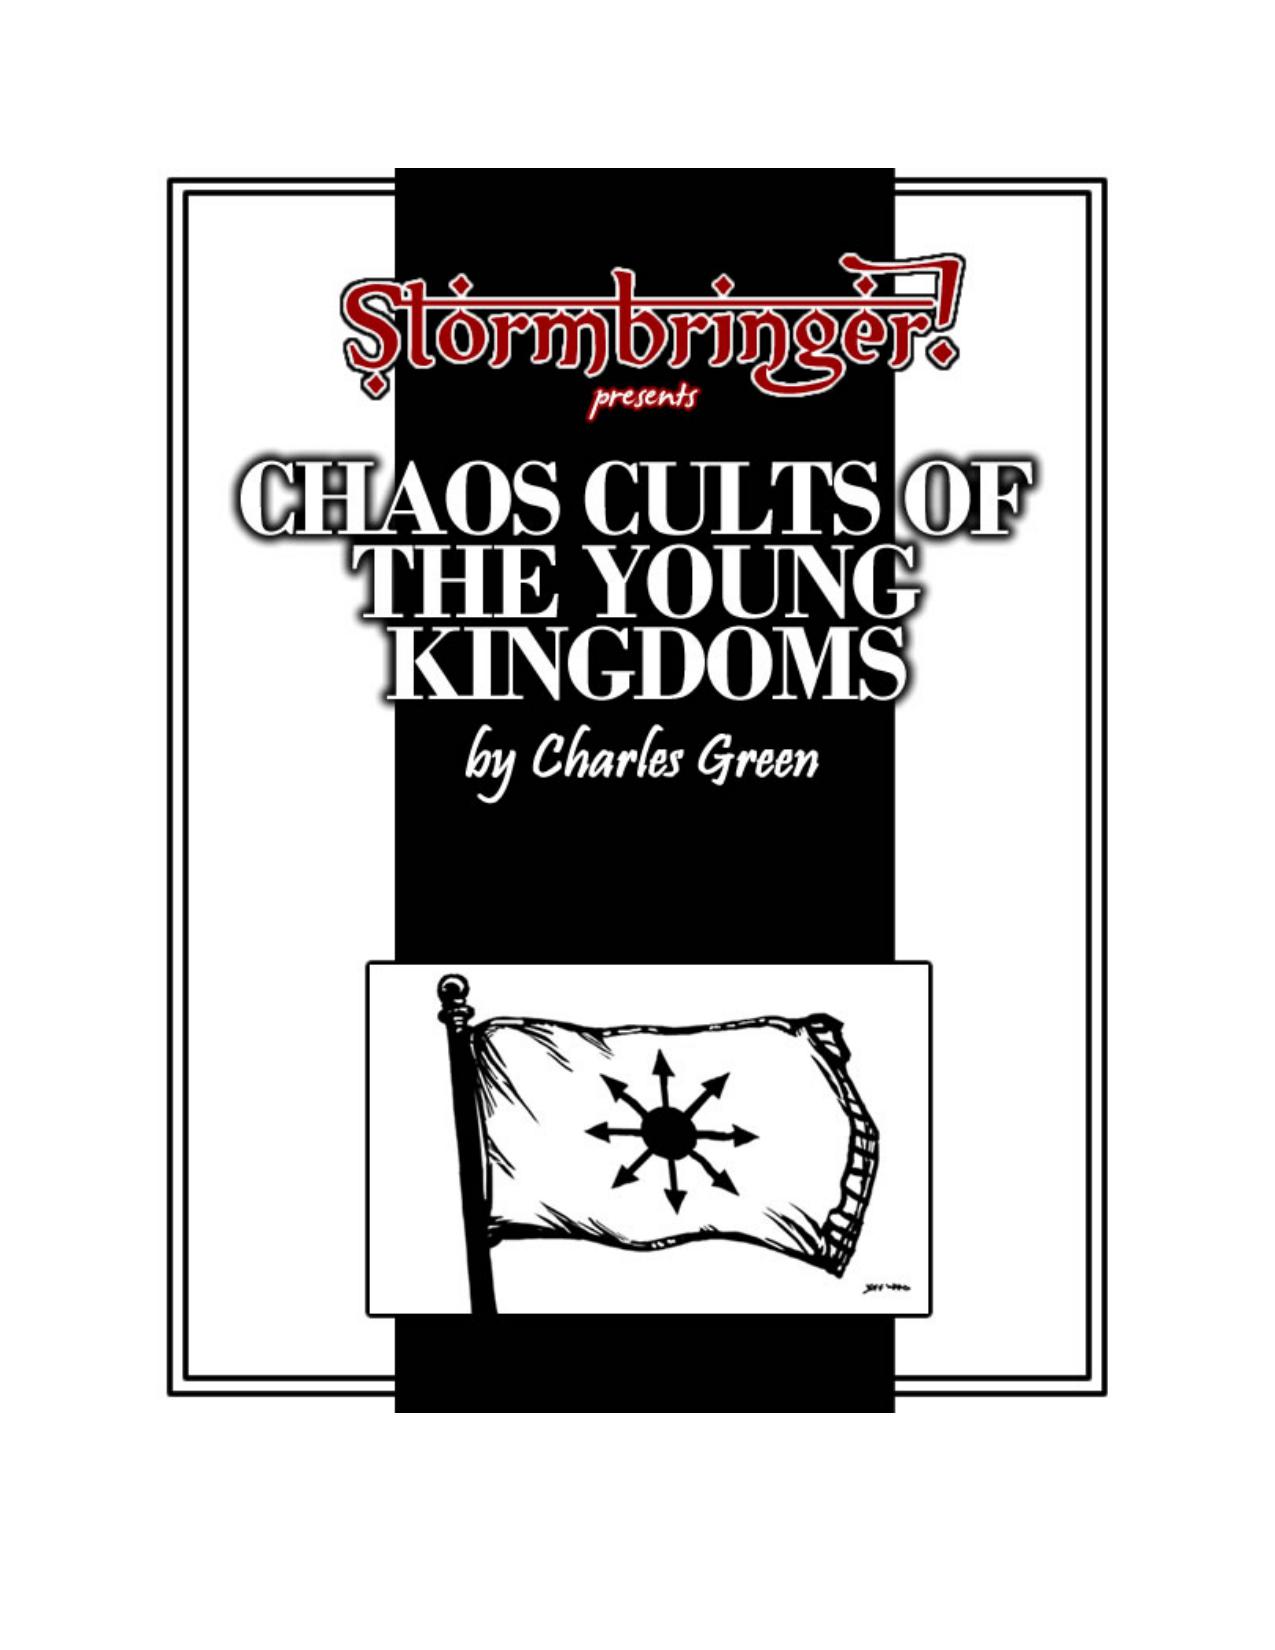 Microsoft Word - Cults of Chaos - version 1.4.doc